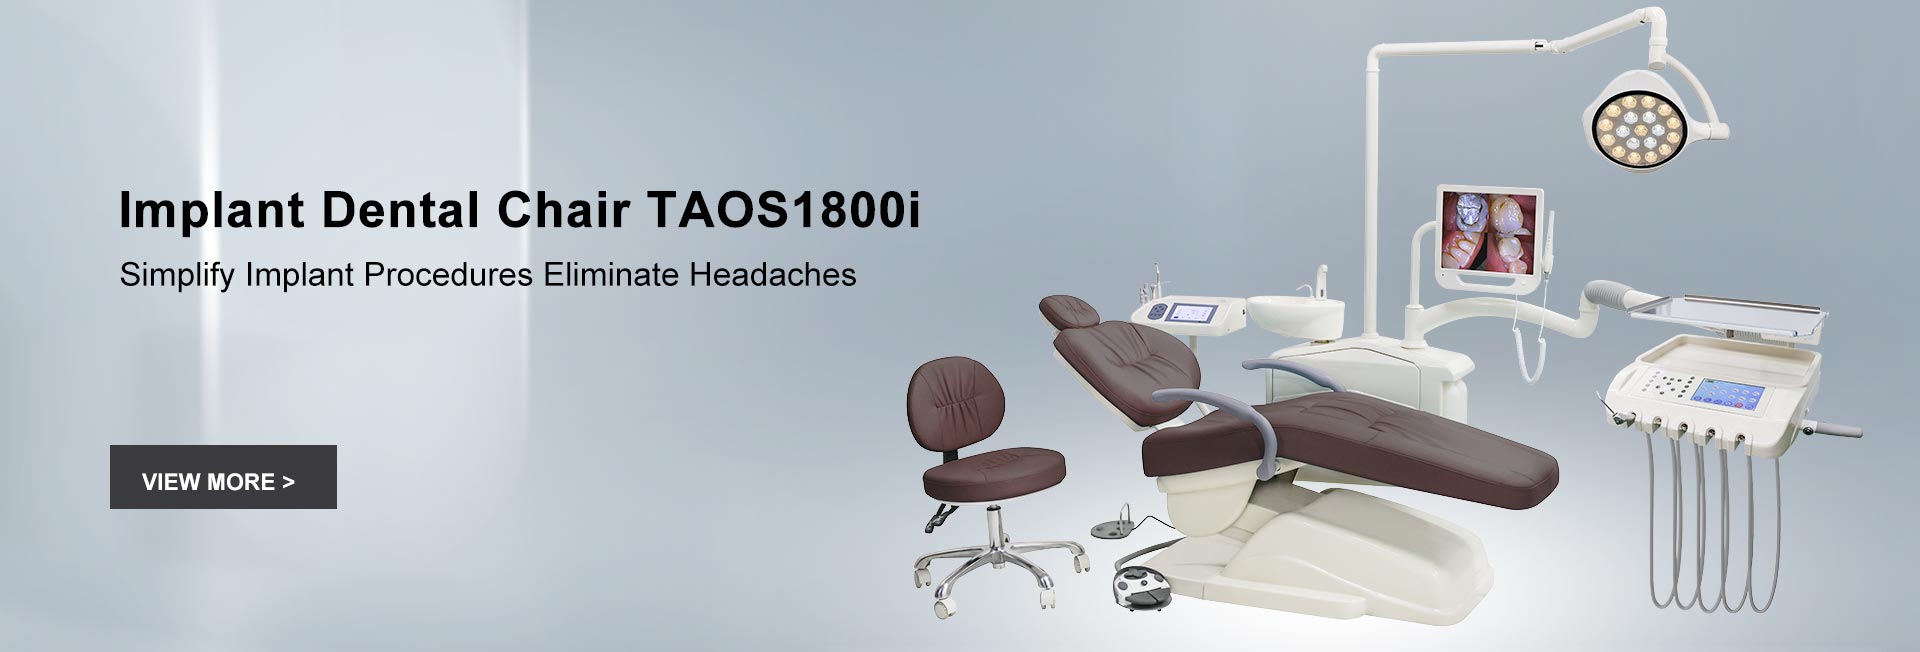 Dental implant surgical chair TAOS1800i